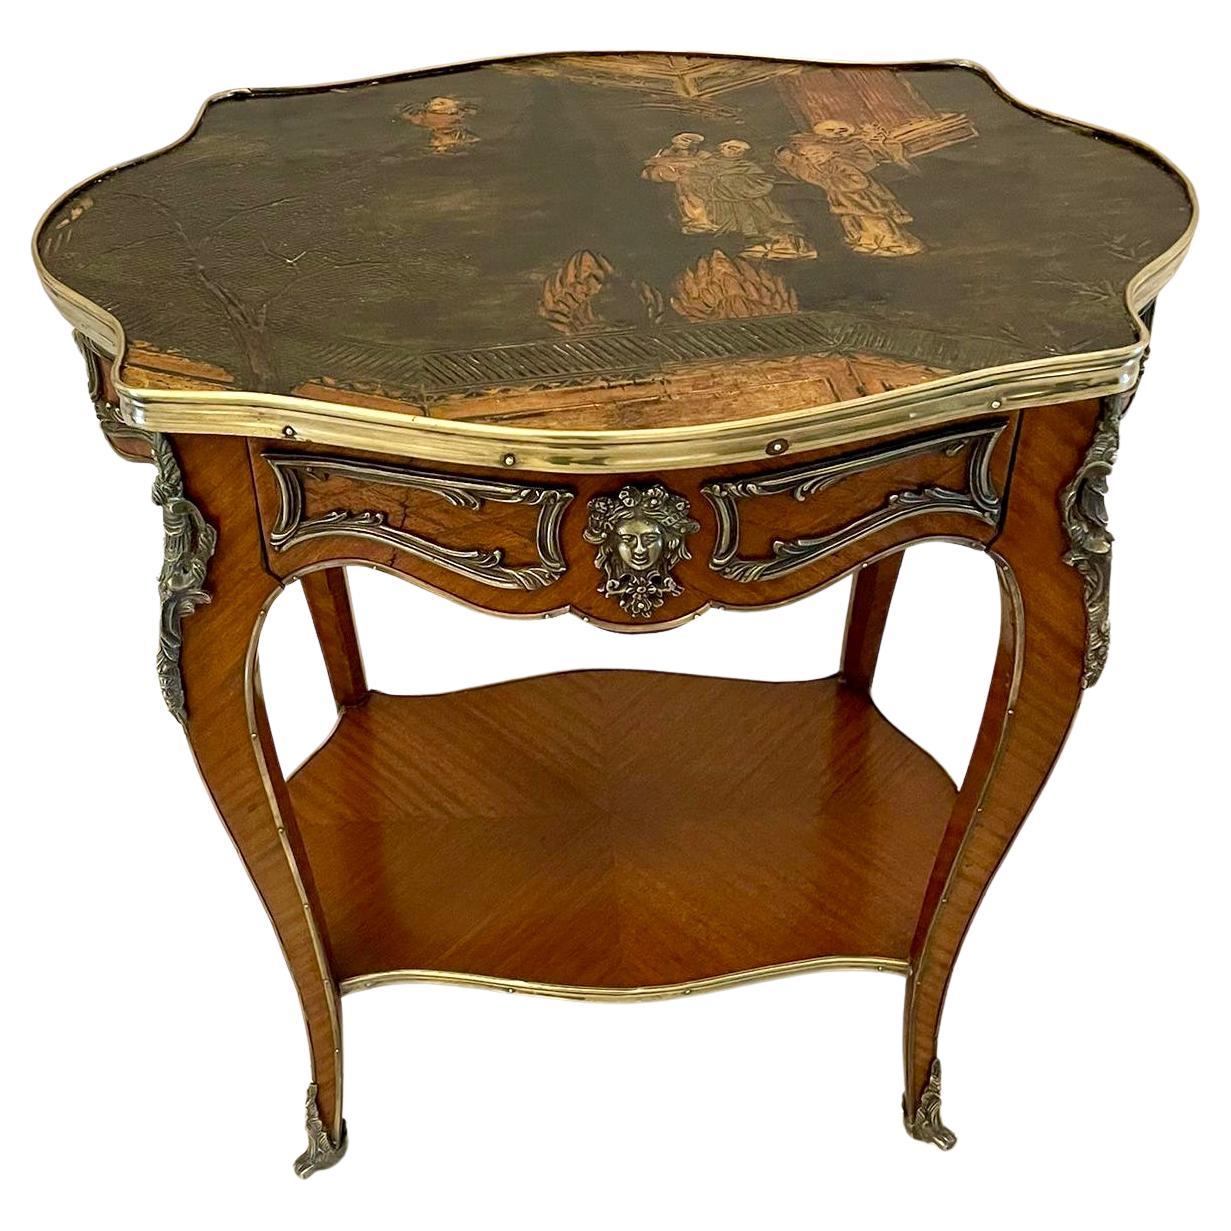 Outstanding Antique French Kingwood and Ormolu Mounted Freestanding Centre Table For Sale